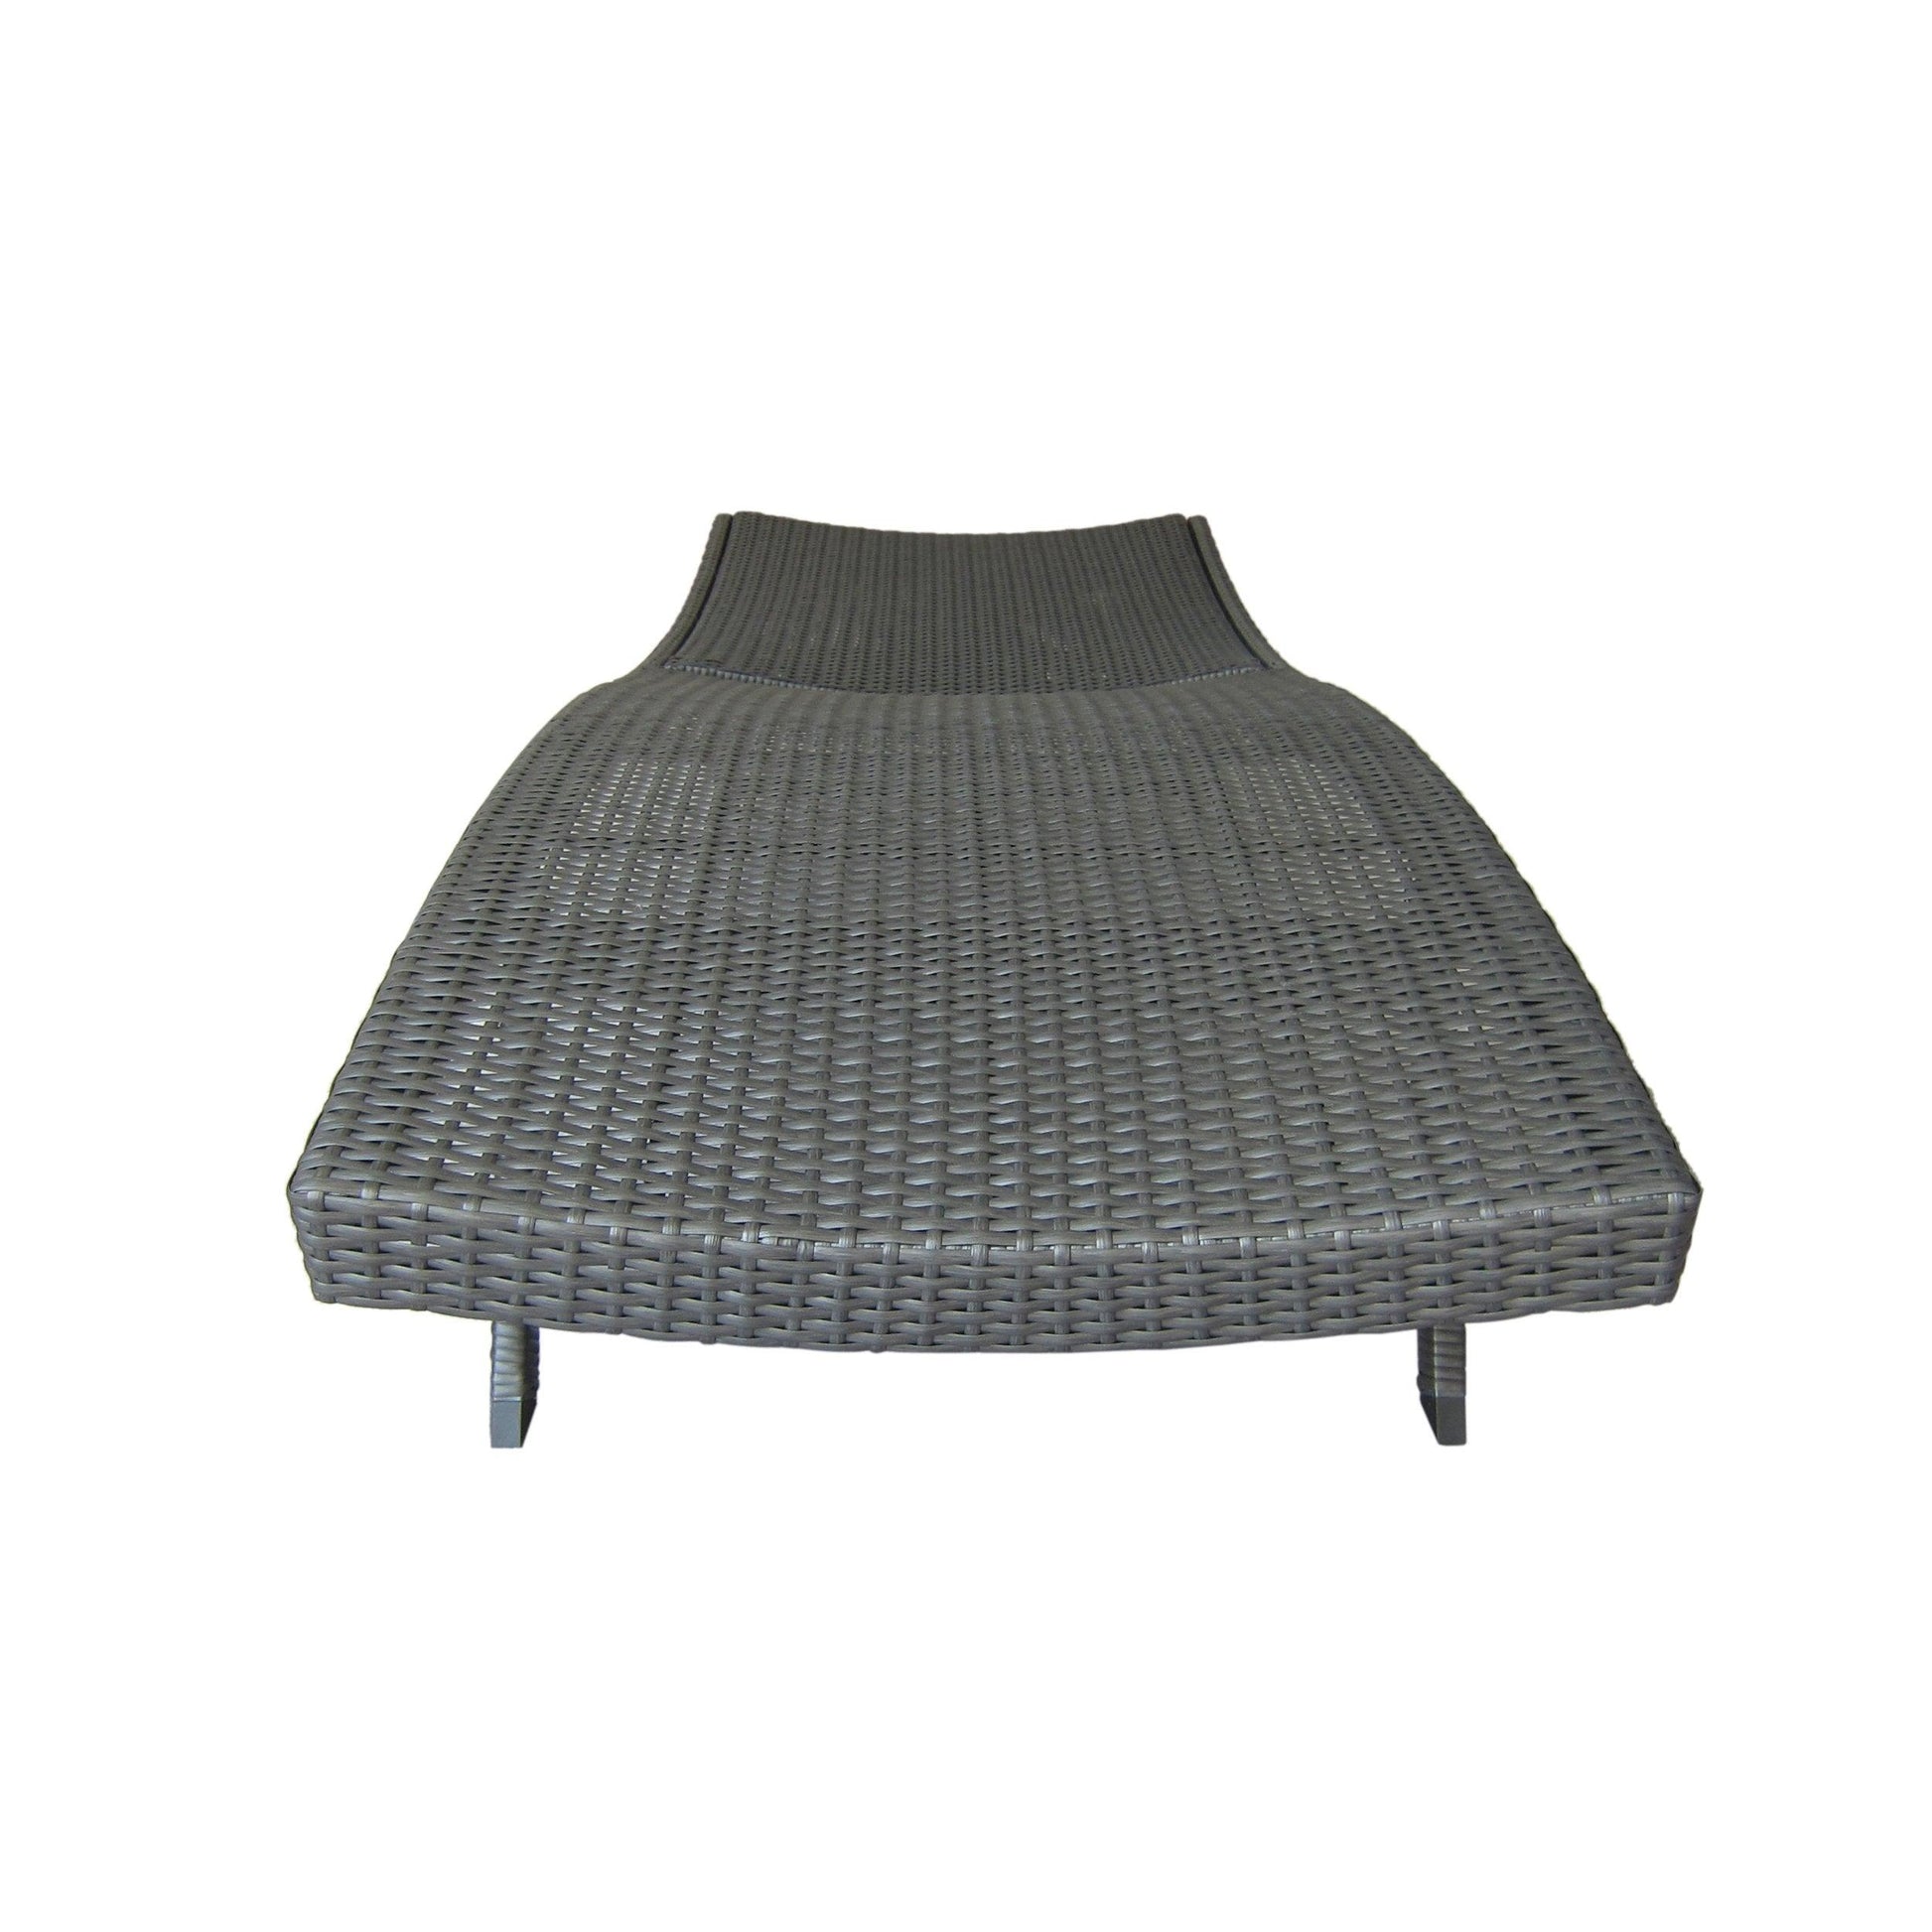 Christopher Knight Home Arthur | Outdoor Wicker Chaise Lounges | Set of 2 | in Grey - CookCave